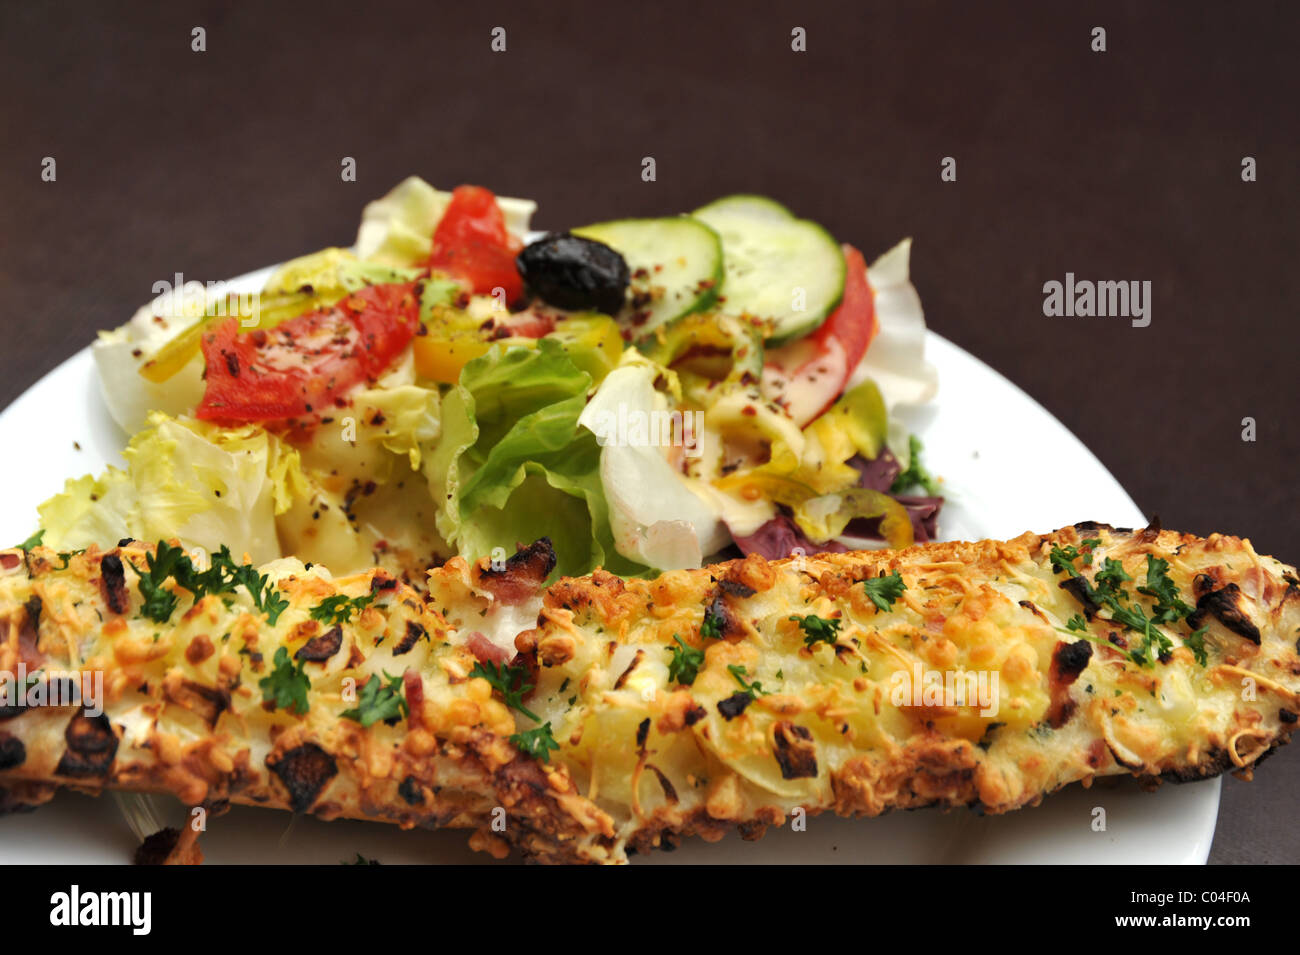 Cheese and ham baguette with salad Stock Photo